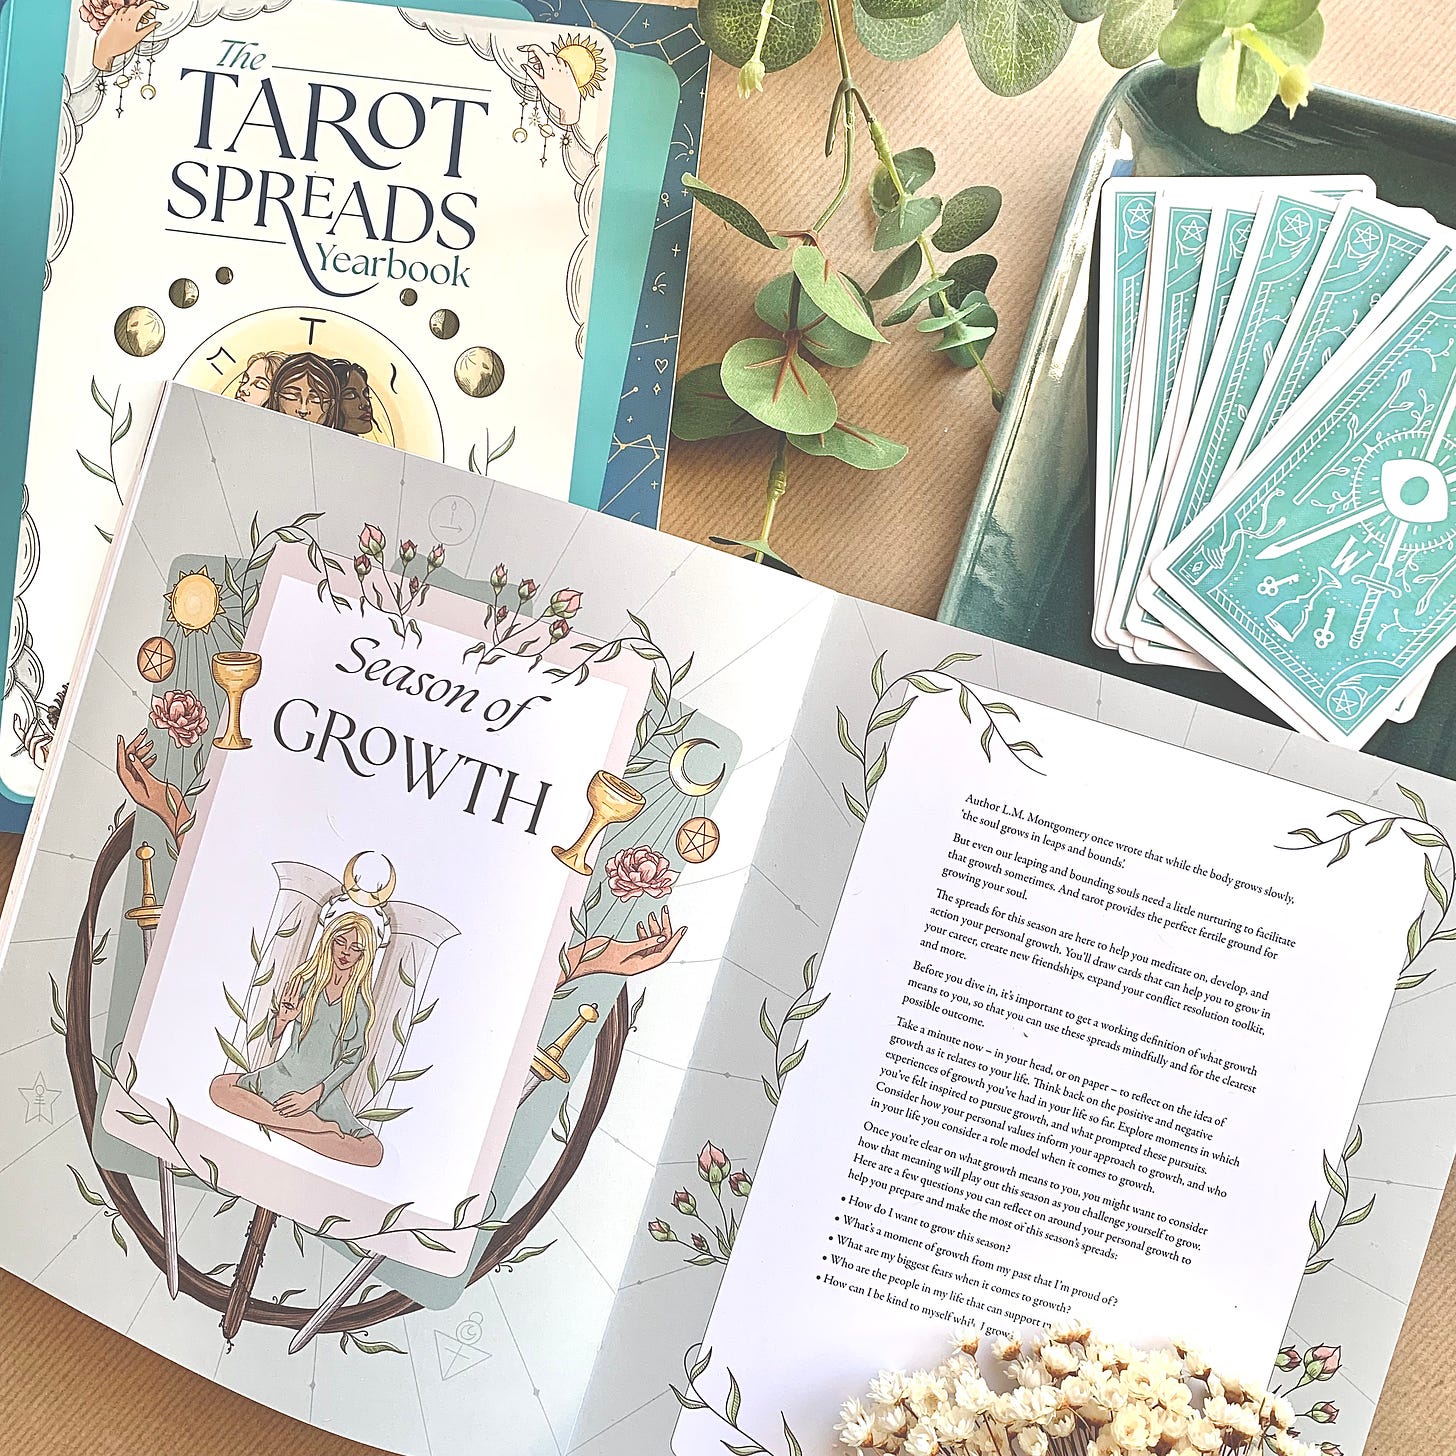 The Tarot Spreads Yearbook Season of Growth by Chelsey Pippin Mizzi